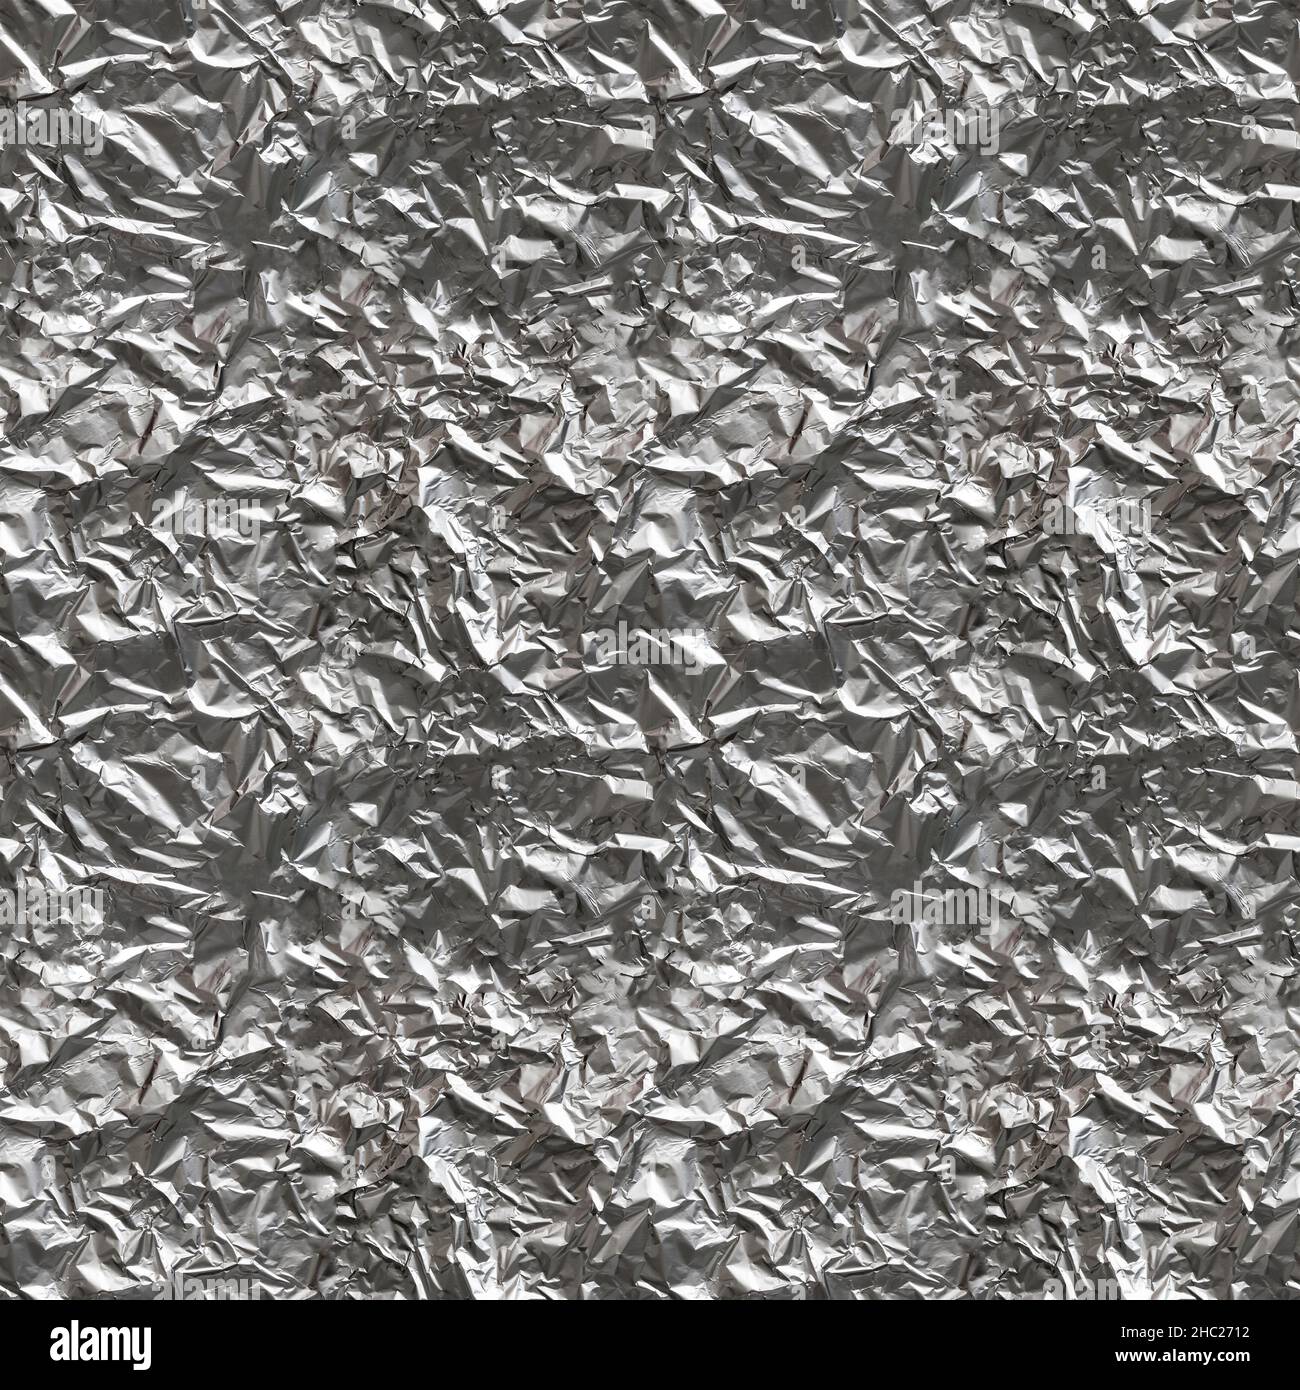 https://c8.alamy.com/comp/2HC2712/seamless-texture-of-crumpled-aluminum-foil-sheet-four-fragments-in-one-top-view-2HC2712.jpg